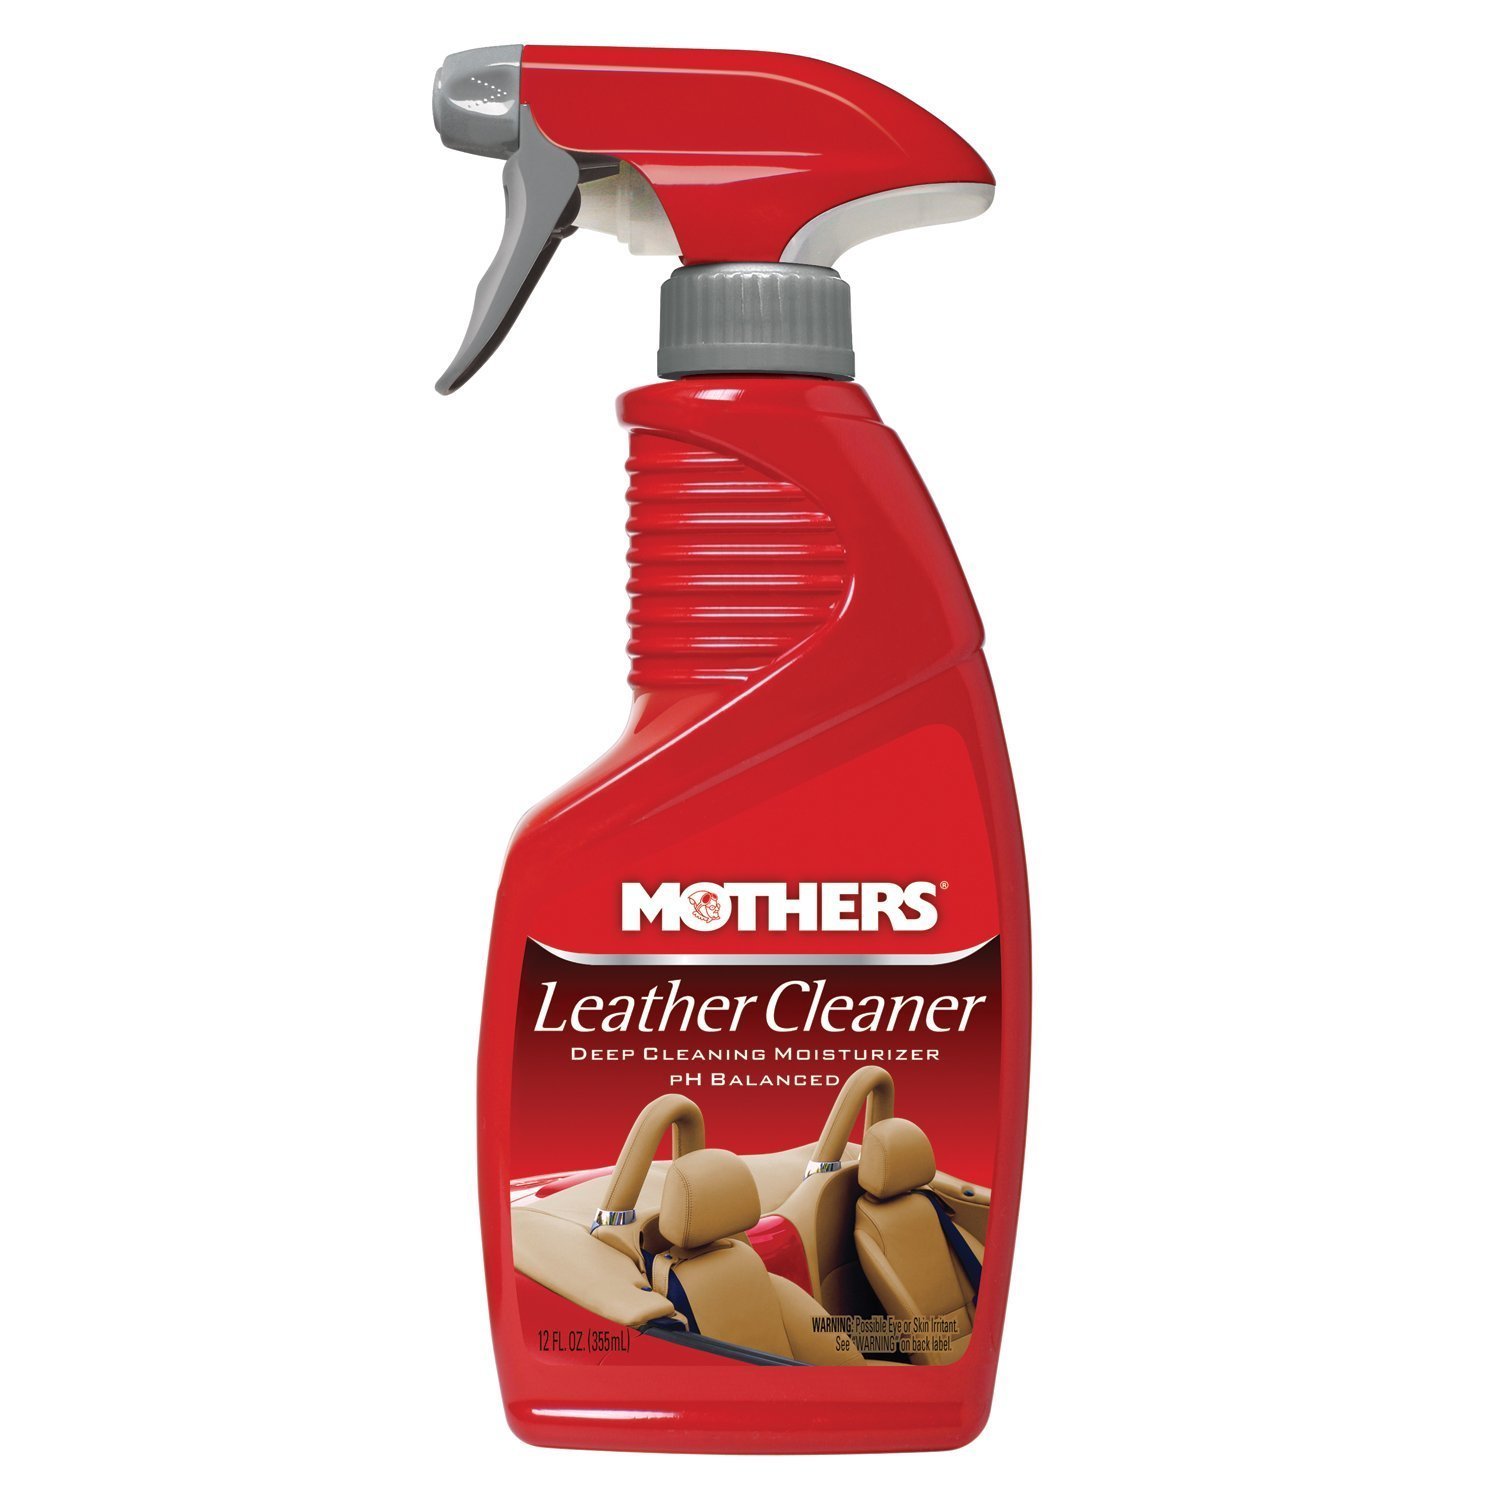 Mothers-Leather-Cleaner-12-oz